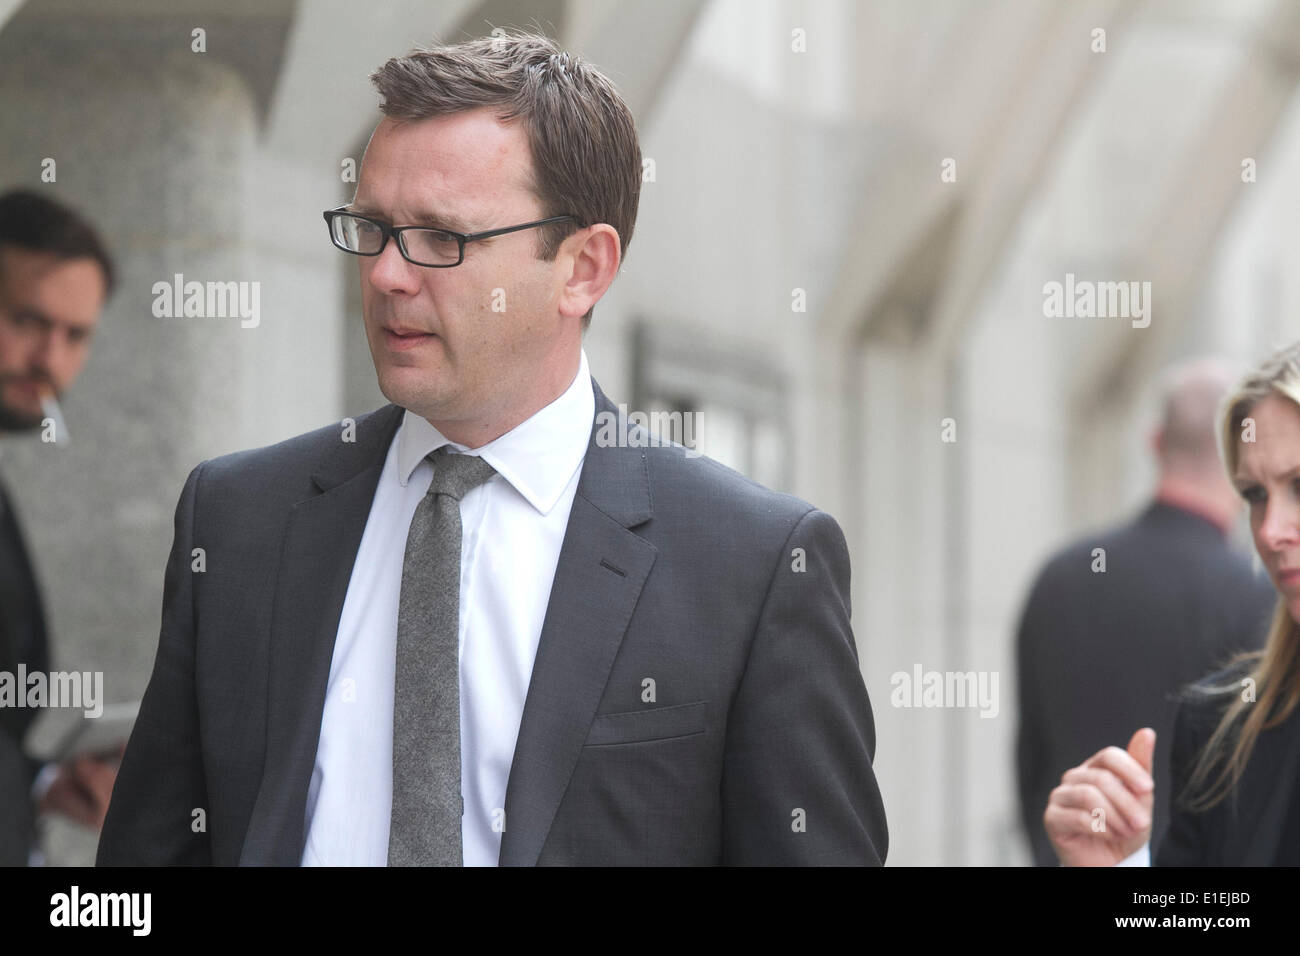 London UK. 2nd June 2014. Former Downing Street Director of Communications Andy Coulson arrives at the the Old Bailey as the hacking trial continues. Andy Coulson and seven other defendants including Rebekah Brooks, Charlie Brooks, Ian Edmonson, Stuart Kuttner,Clive Goodman,Cheryl Carter and Mark Hanna face charges related to allegations of conspiracy to intercept communications and voice mail of well know people including that of murder victim Milly Dowler Credit:  amer ghazzal/Alamy Live News Stock Photo